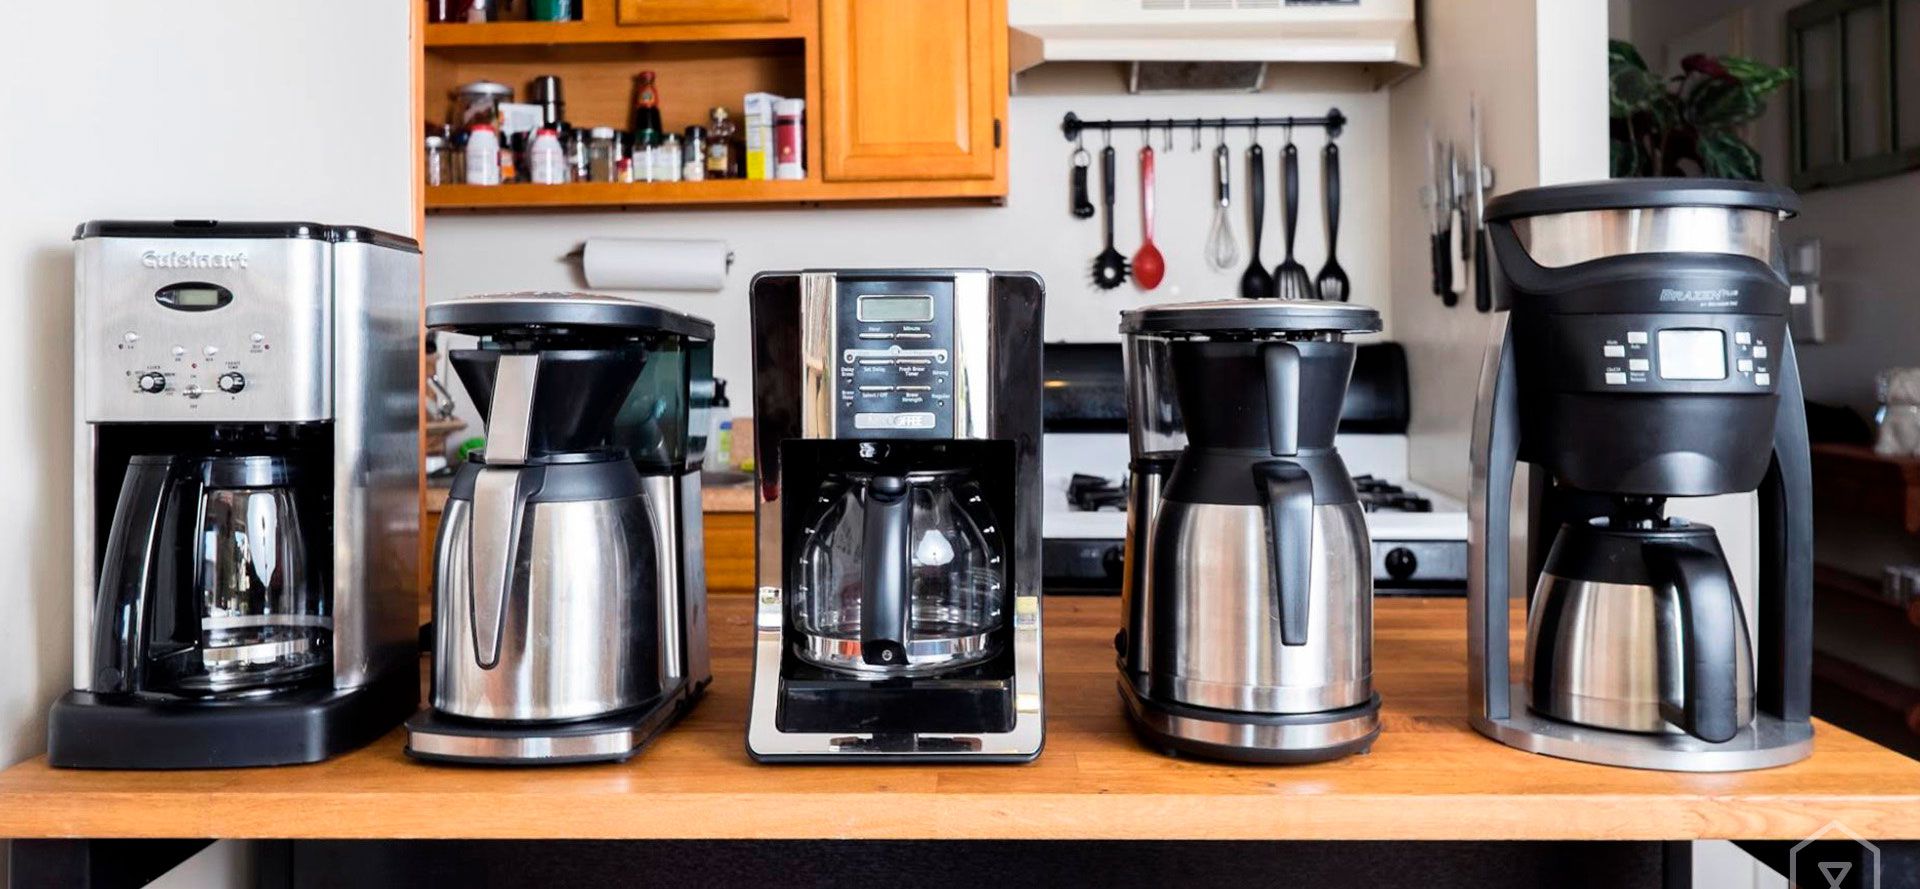 Drip Coffee Makers In The Kitchen.